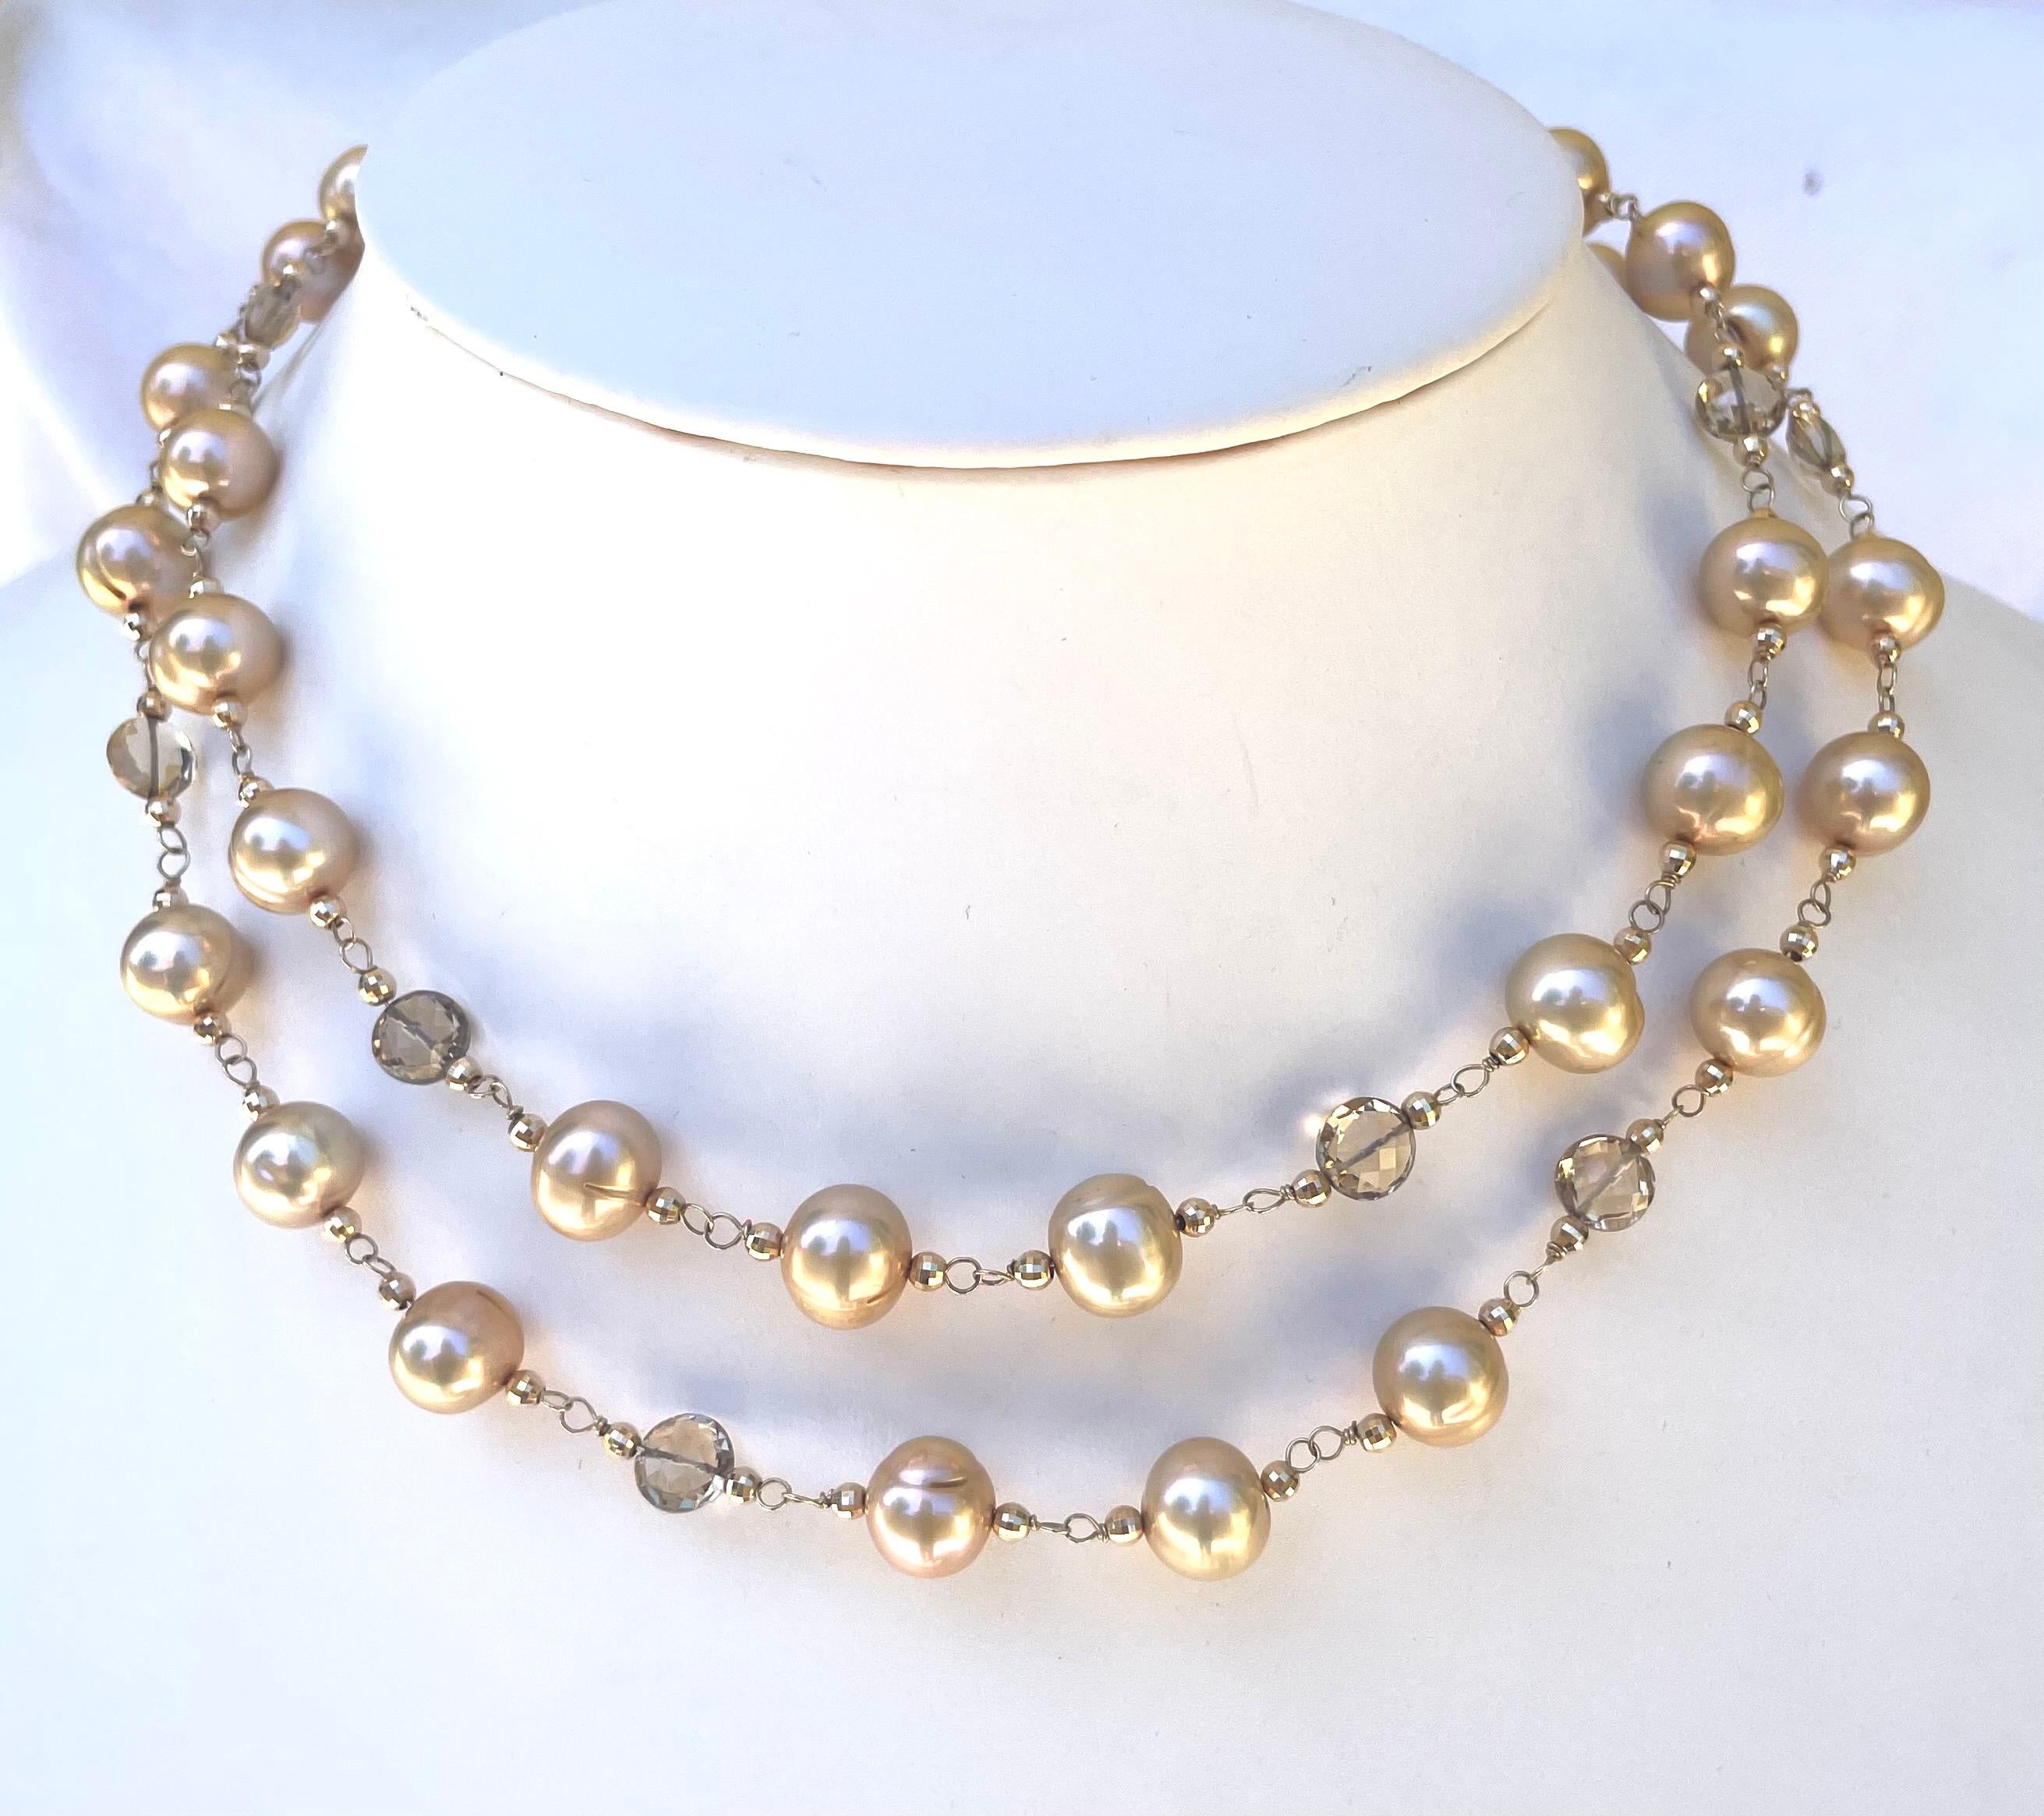 Description
Lustrous freshwater pearls accented with faceted coin shape champagne citrine and 14k yellow gold balls. Necklace can be worn long or short when doubled.
Item # N2015

Materials and Weight
Freshwater pearls, 10mm
Champagne citrine, 8mm,